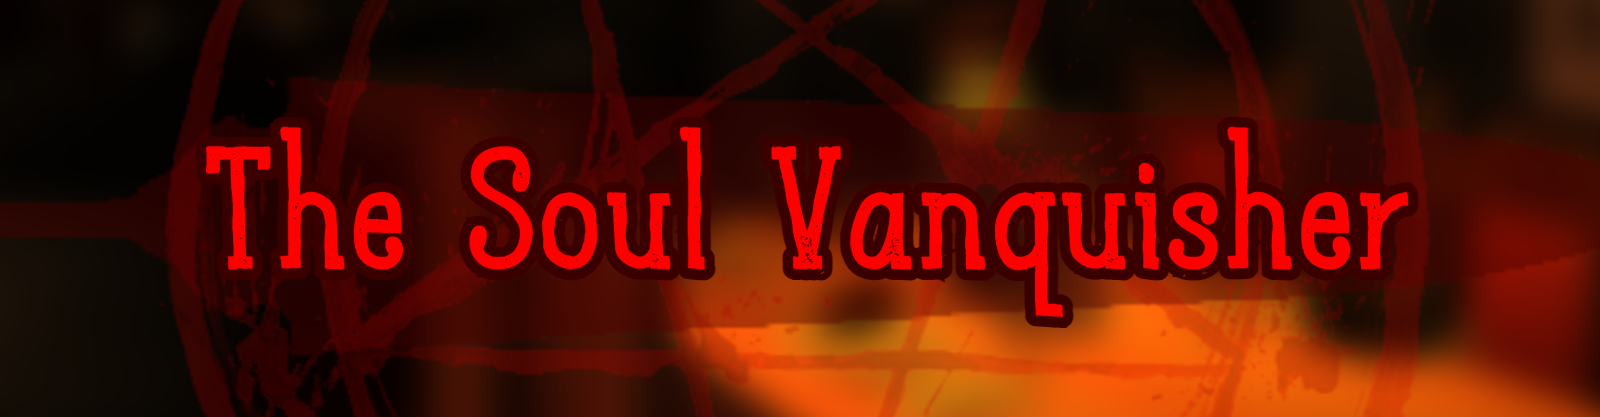 The Soul Vanquisher